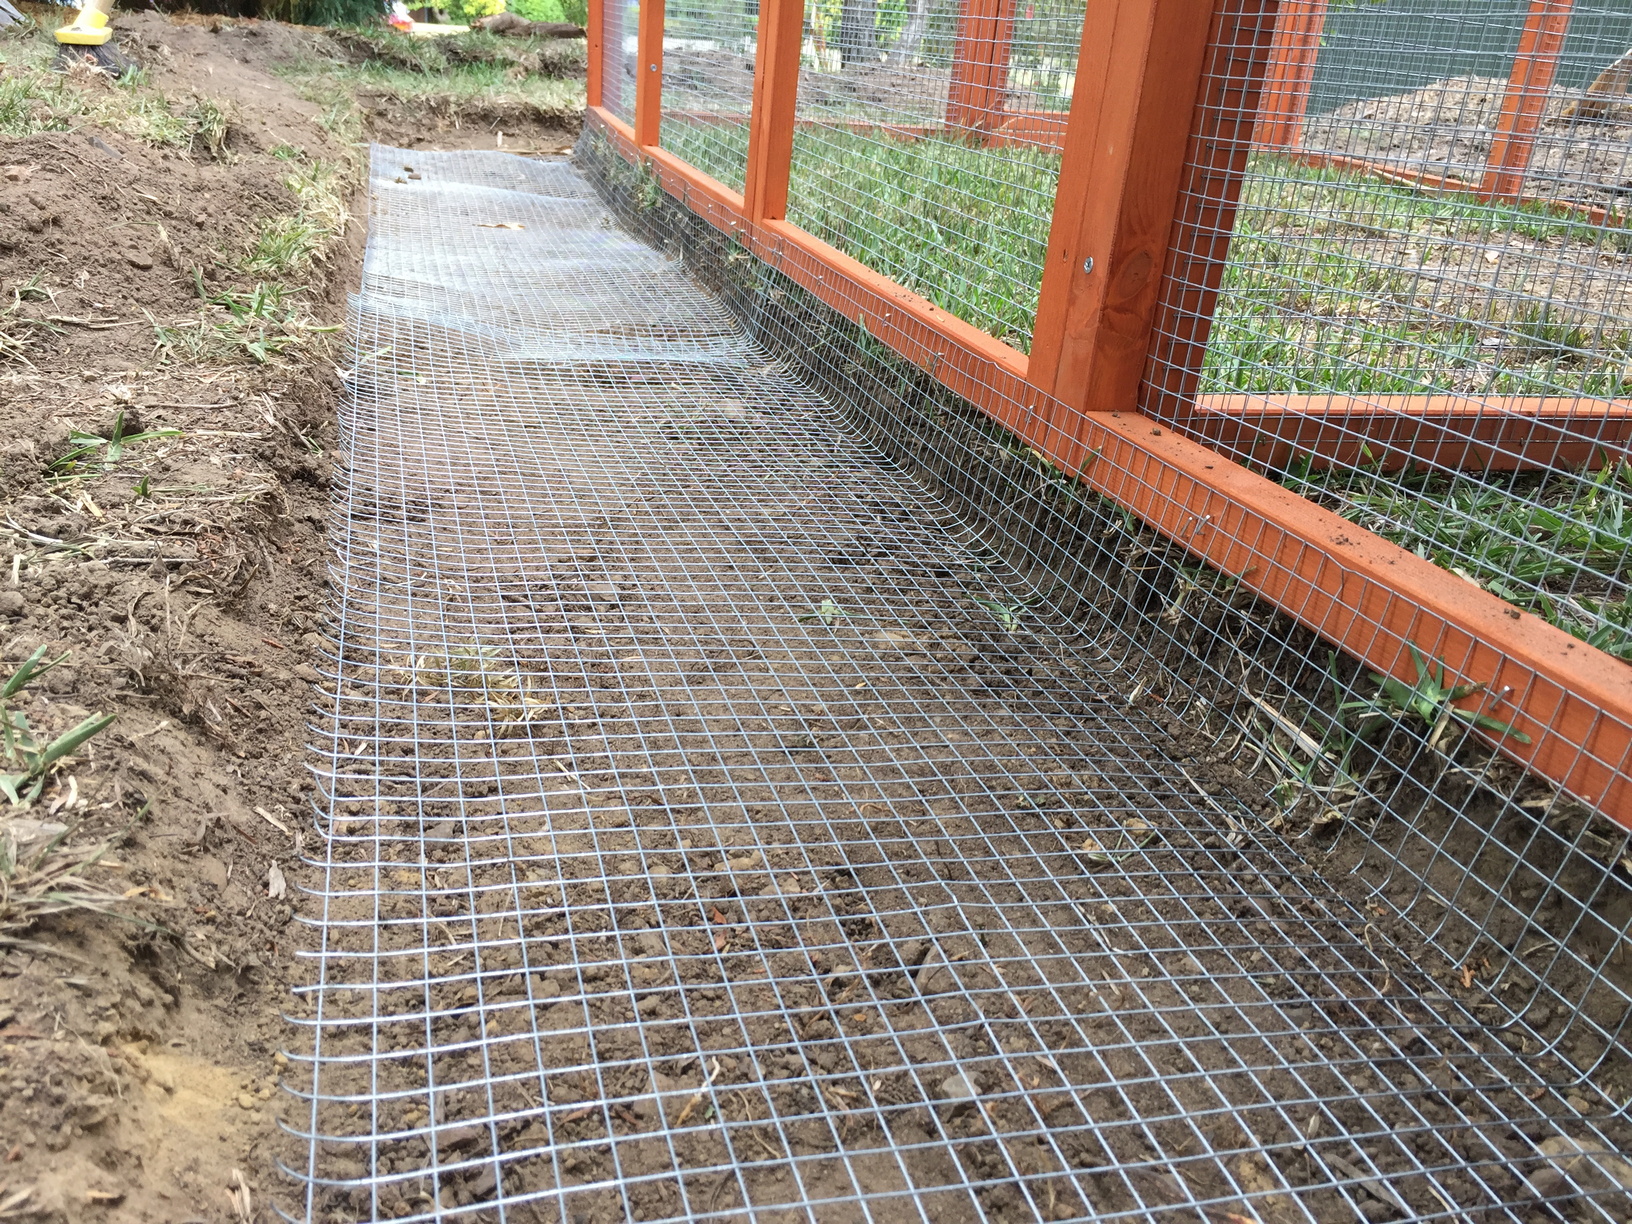 The mesh flooring cut to length, stapled to the edge of the coop and laid in the trench